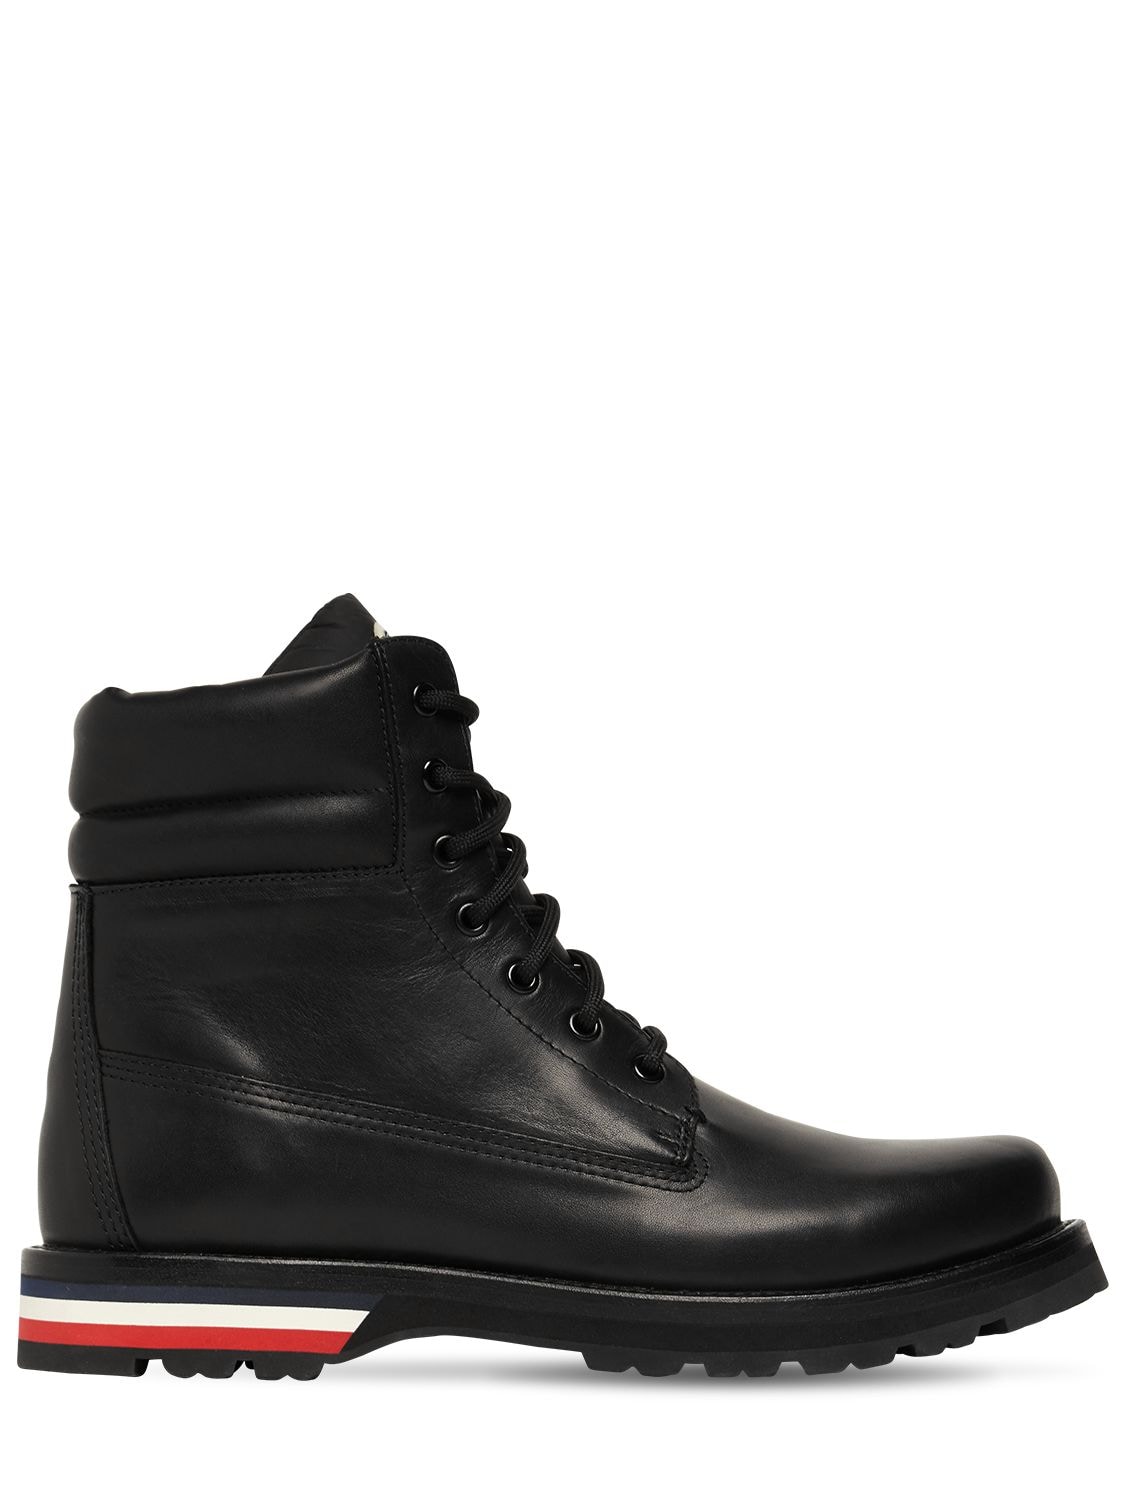 MONCLER VANCOUVER LEATHER ANKLE BOOTS,72I0T9003-OTK50